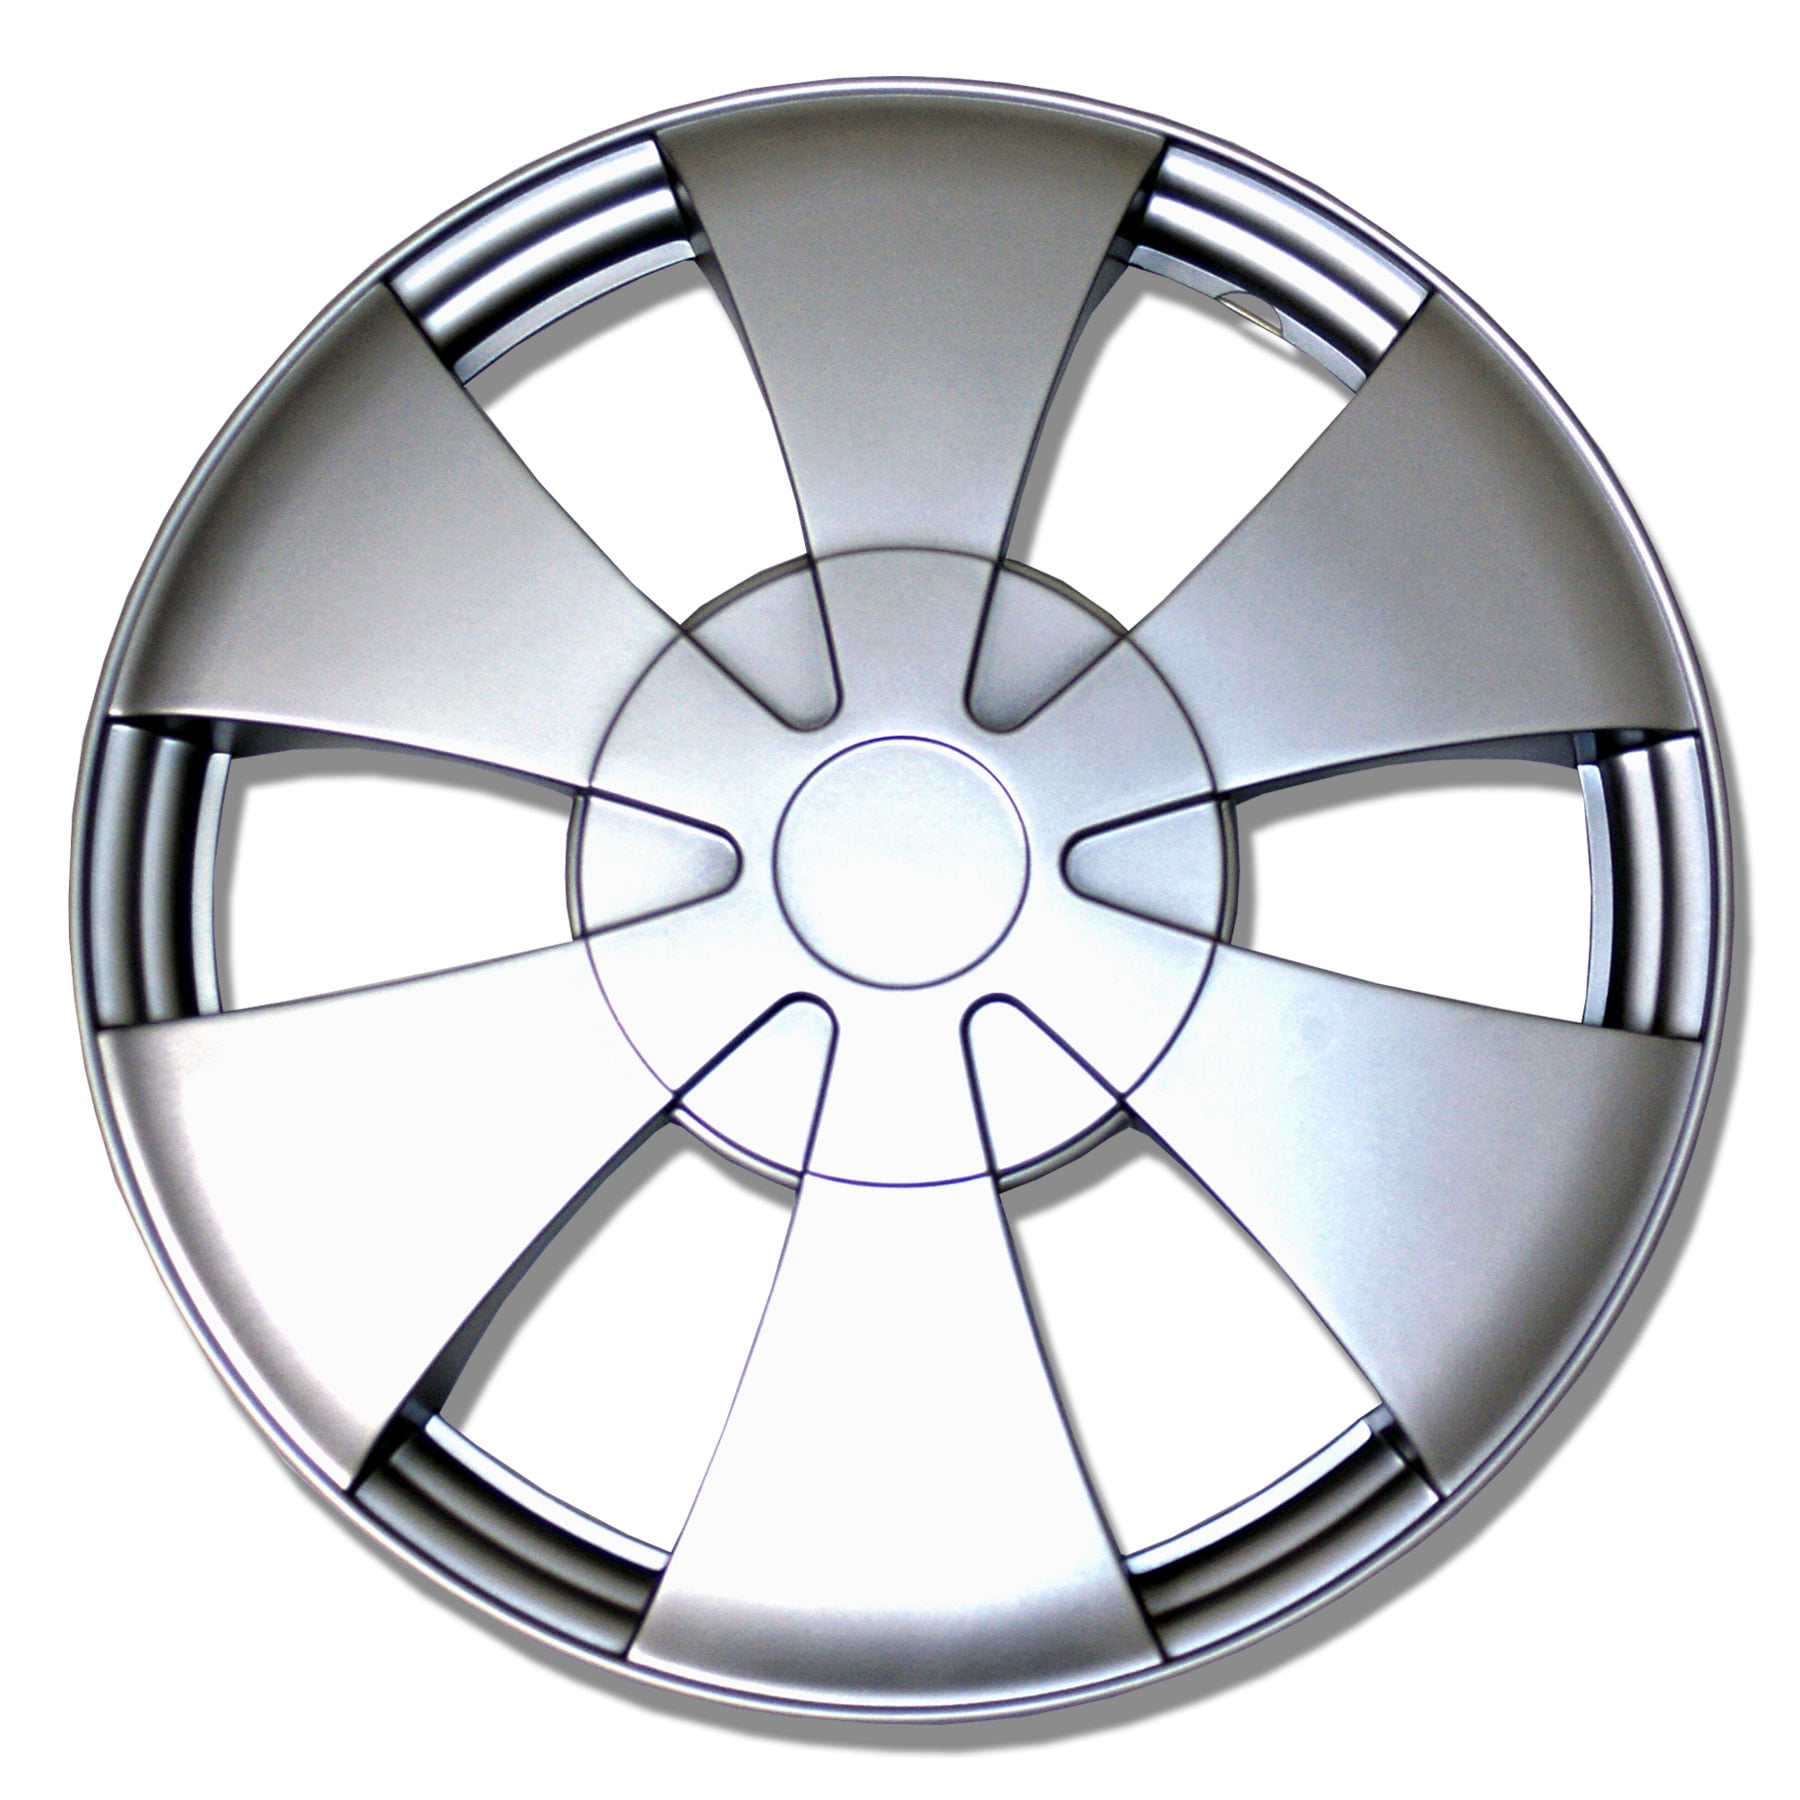 14-Inches Metallic Silver Hubcaps Wheel Cover Pop-On TuningPros WSC3-533S14 4pcs Set Snap-On Type 